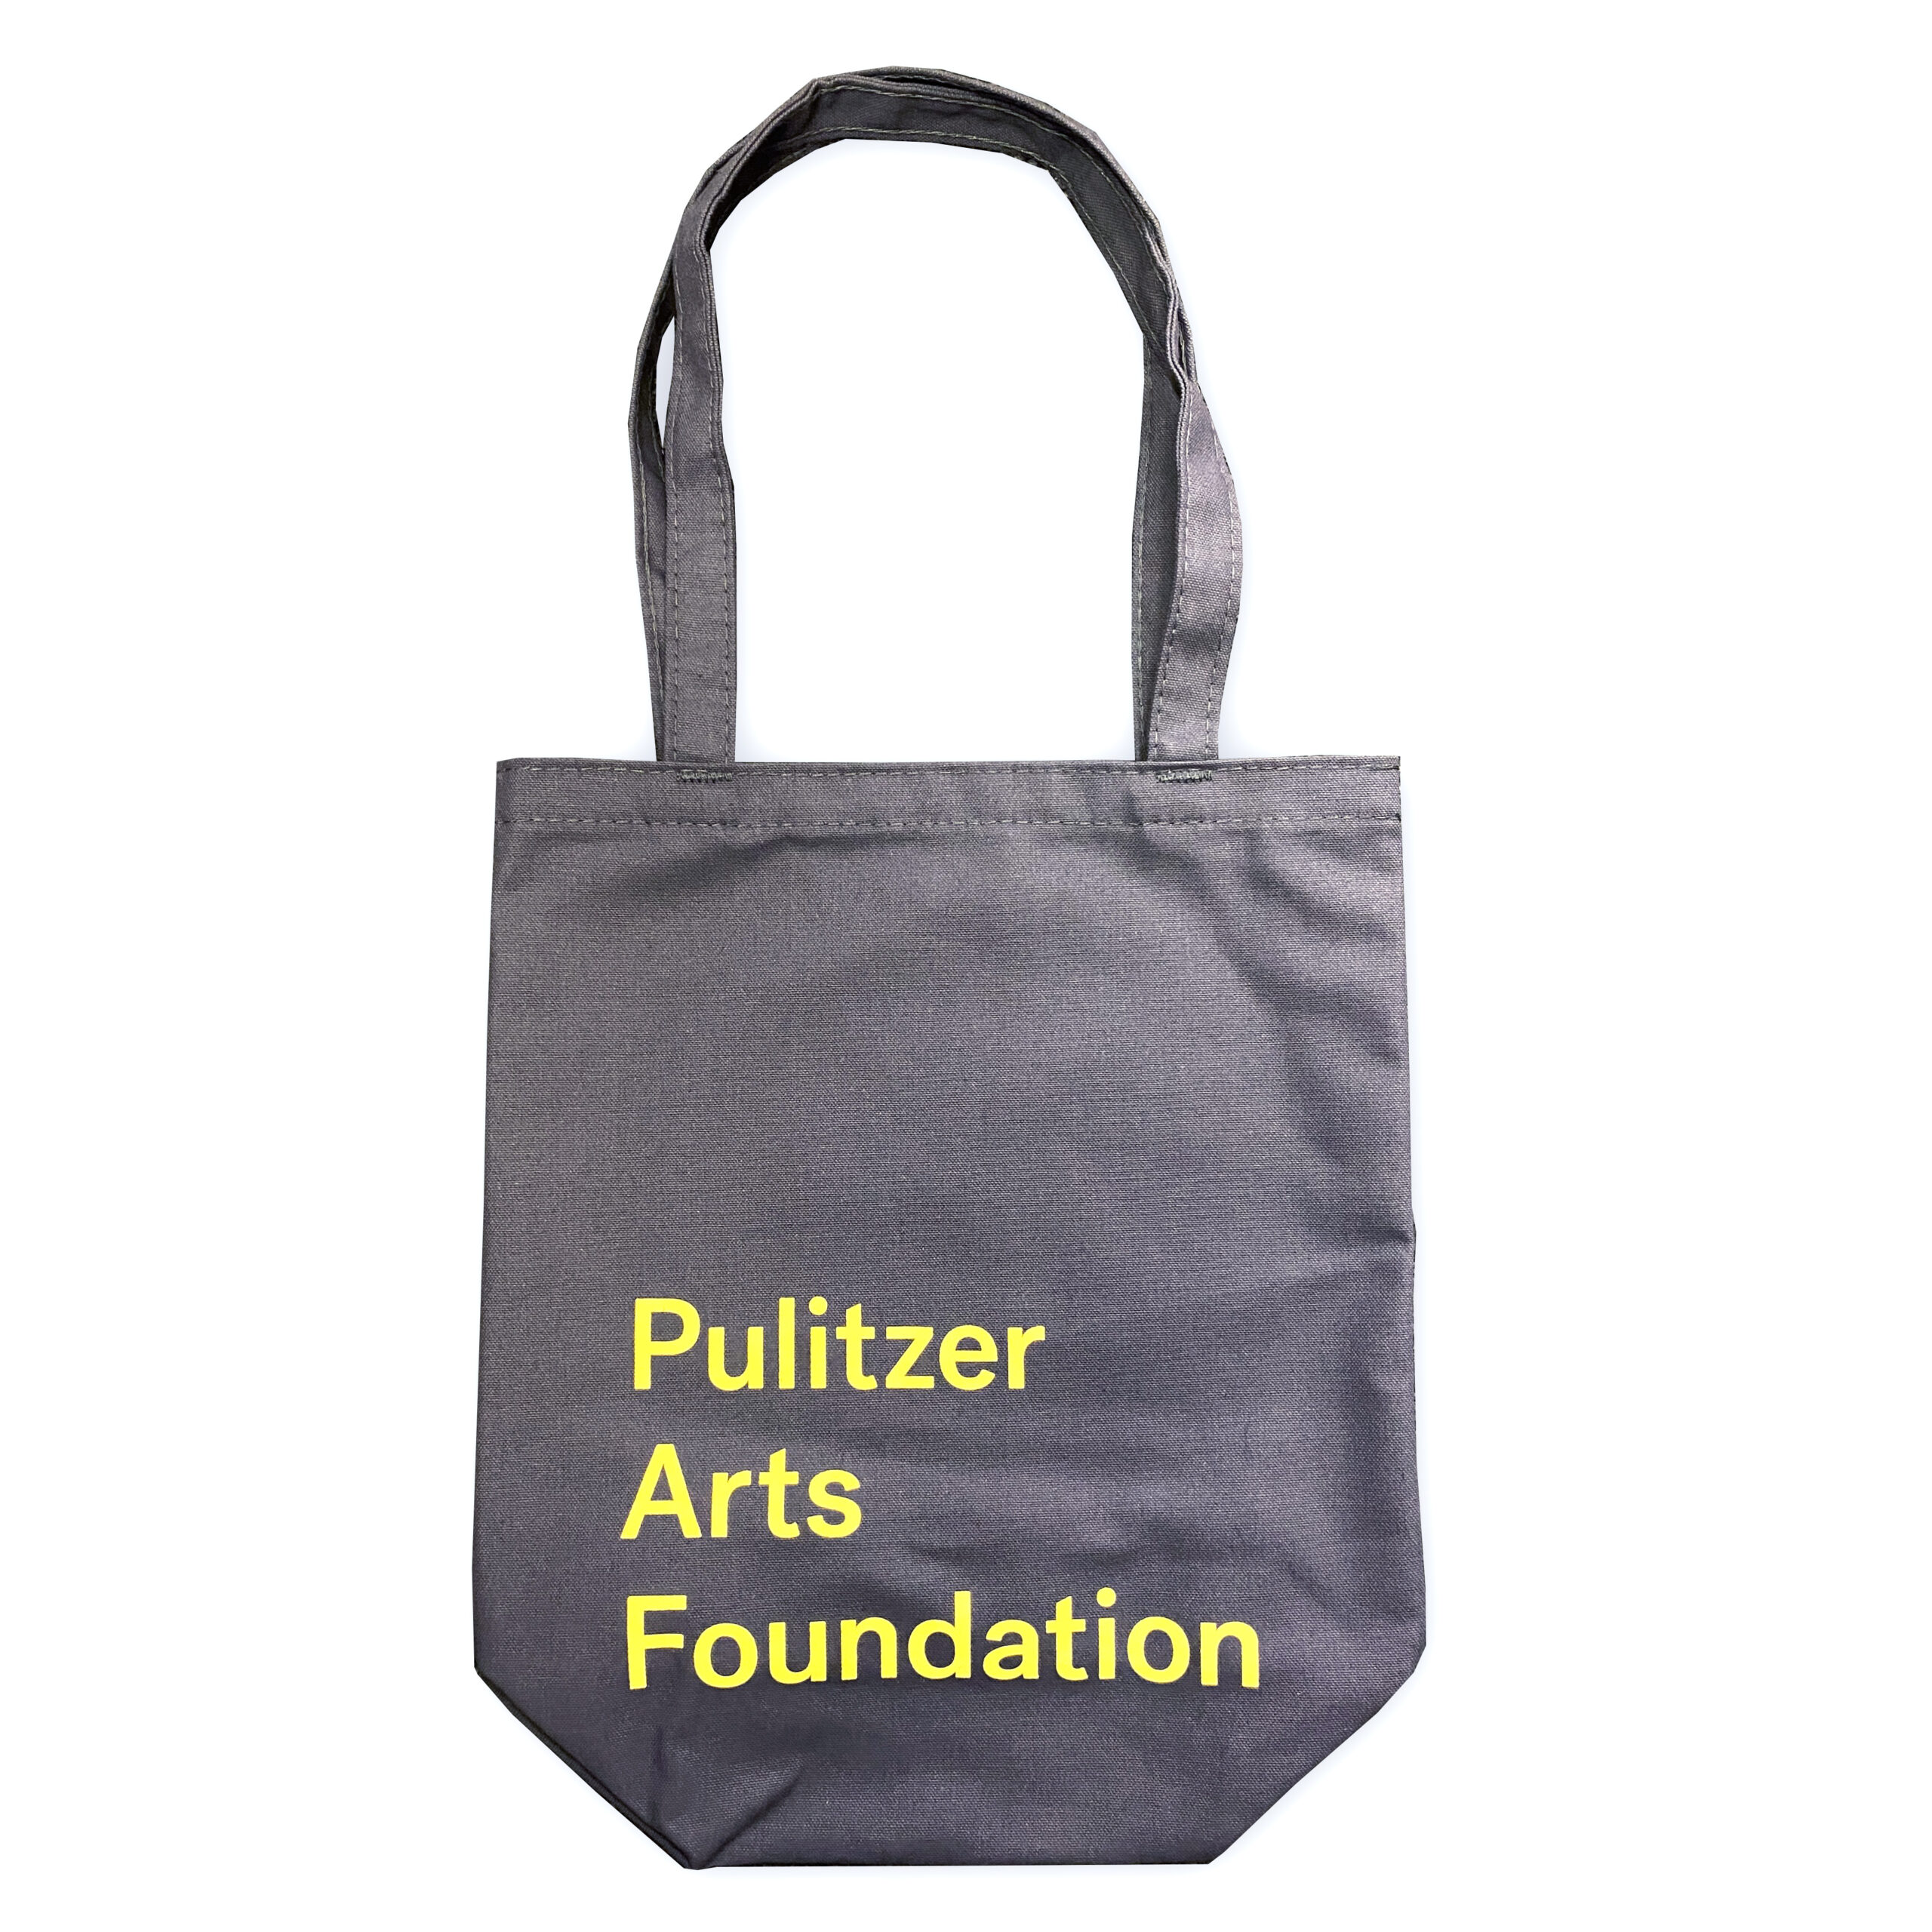 A product shot of a grey tote bag with yellow lettering